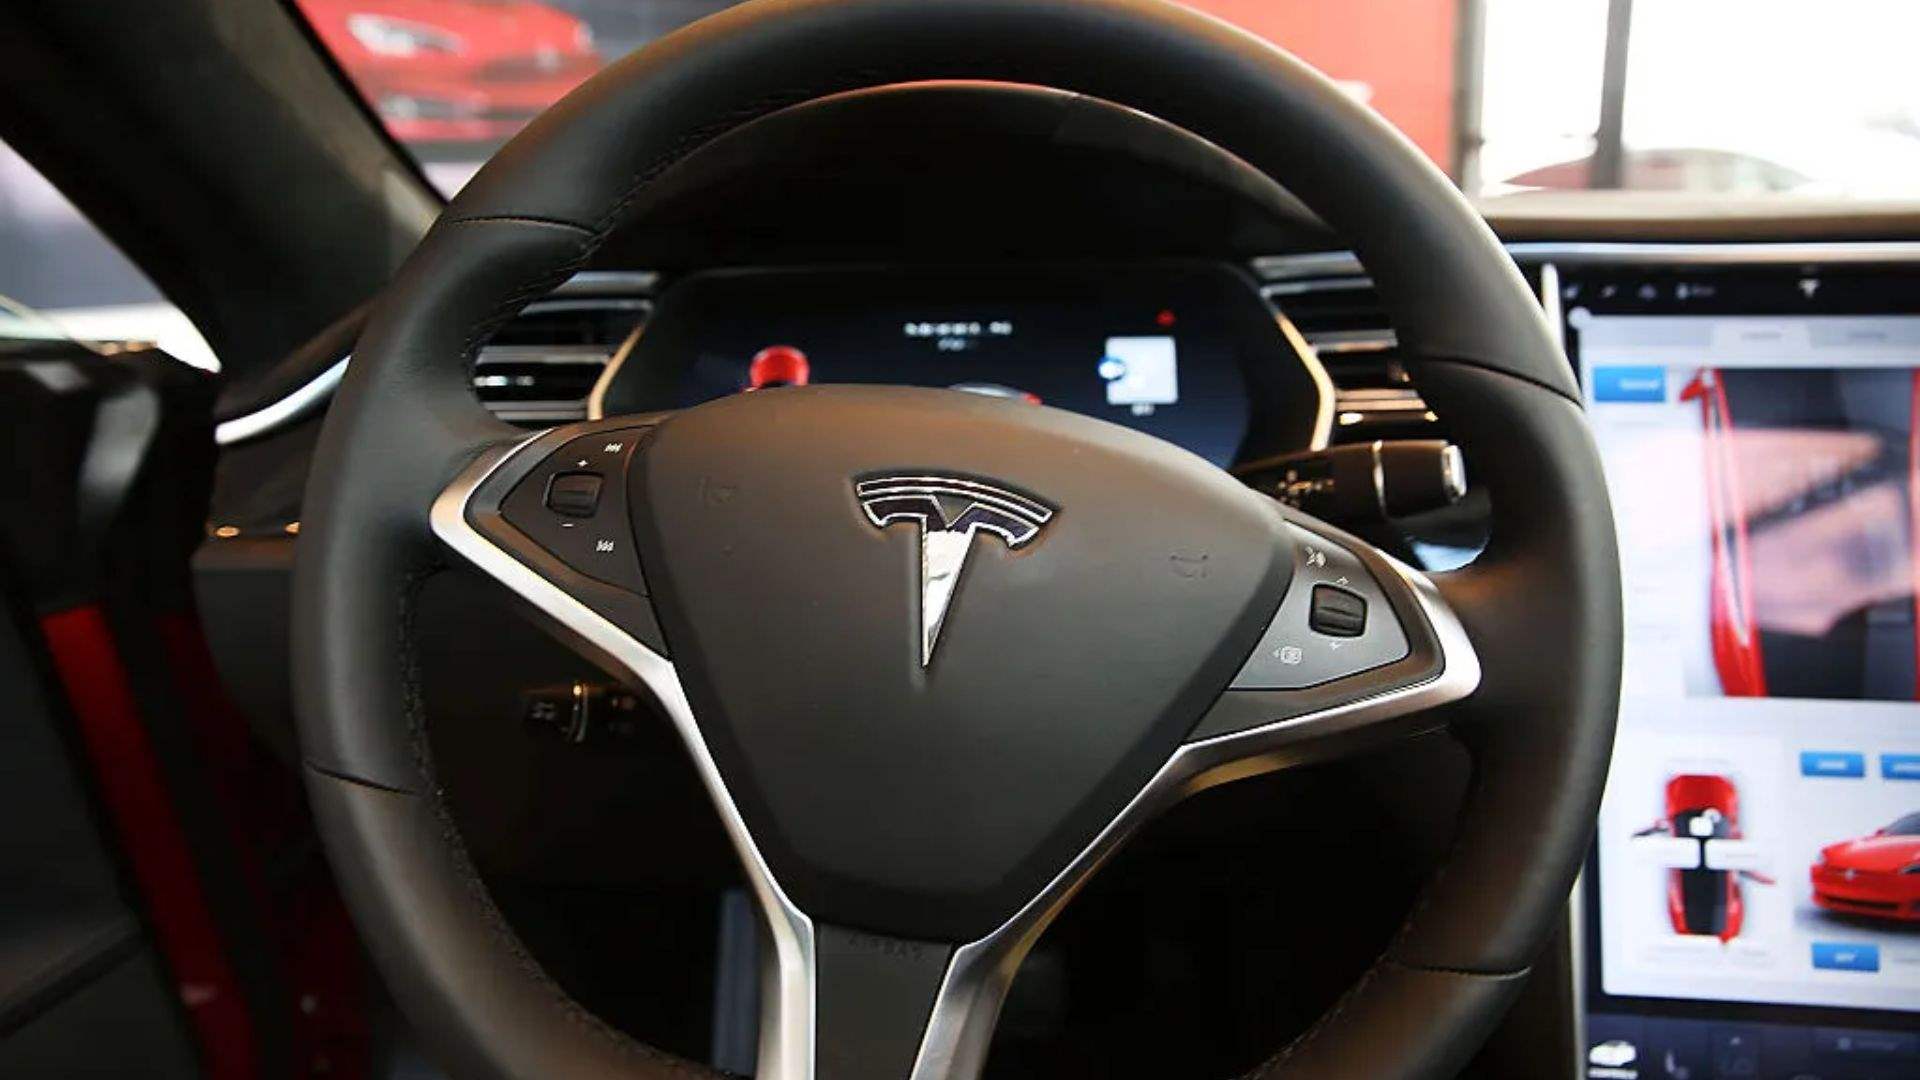 Tesla to provide more info on its driver alert system amid Autopilot probe